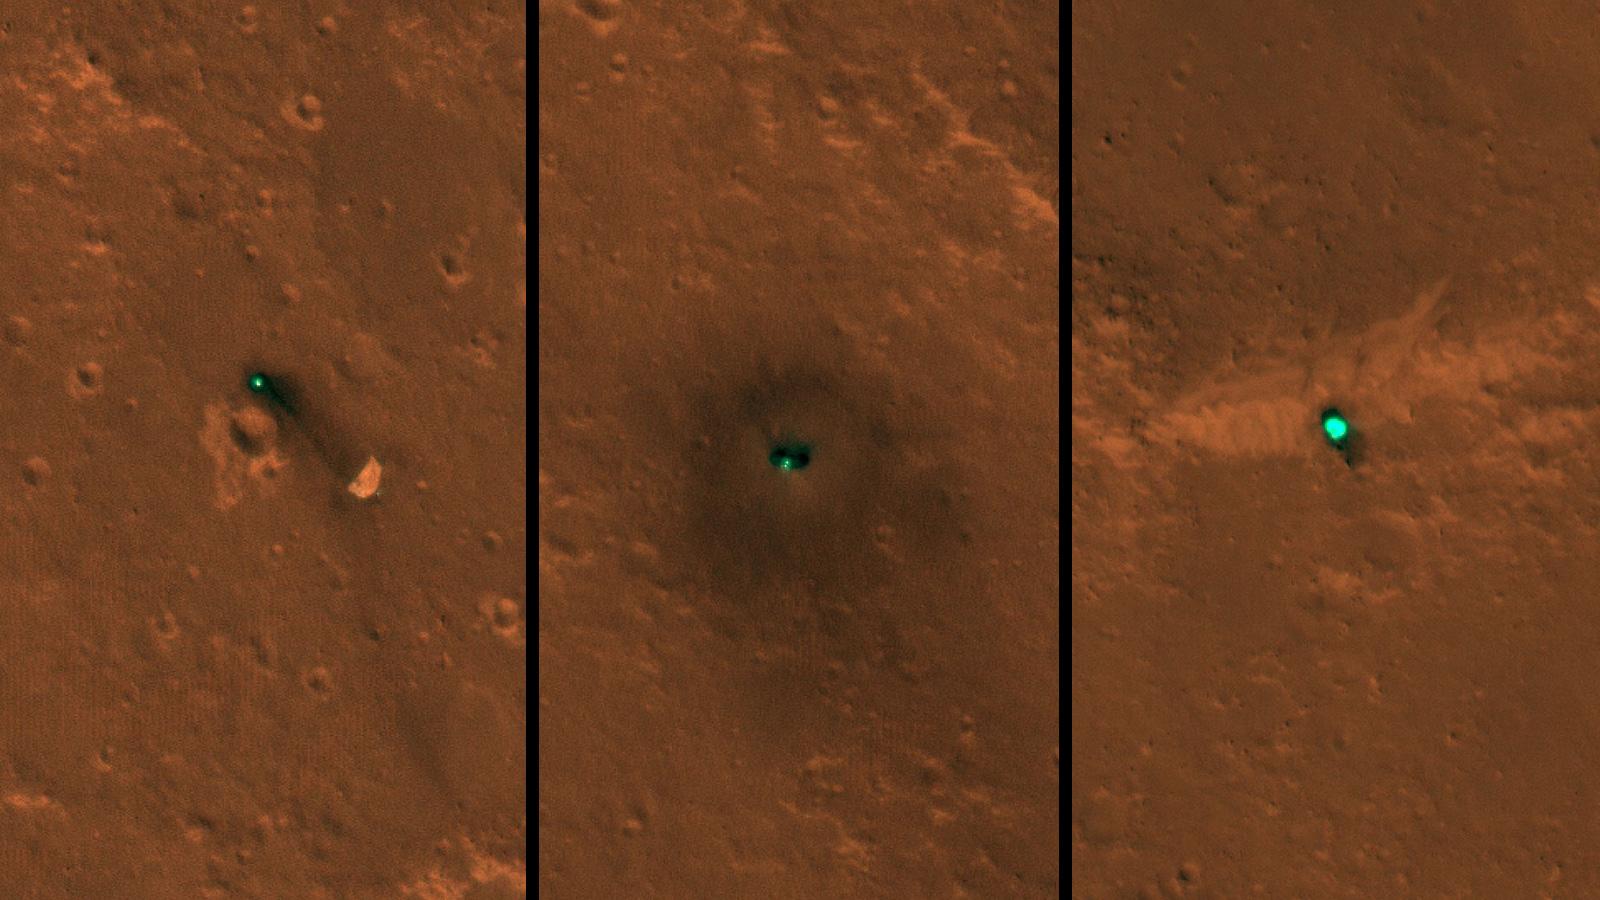 PIA22875: InSight on Mars, As Seen by HiRISE